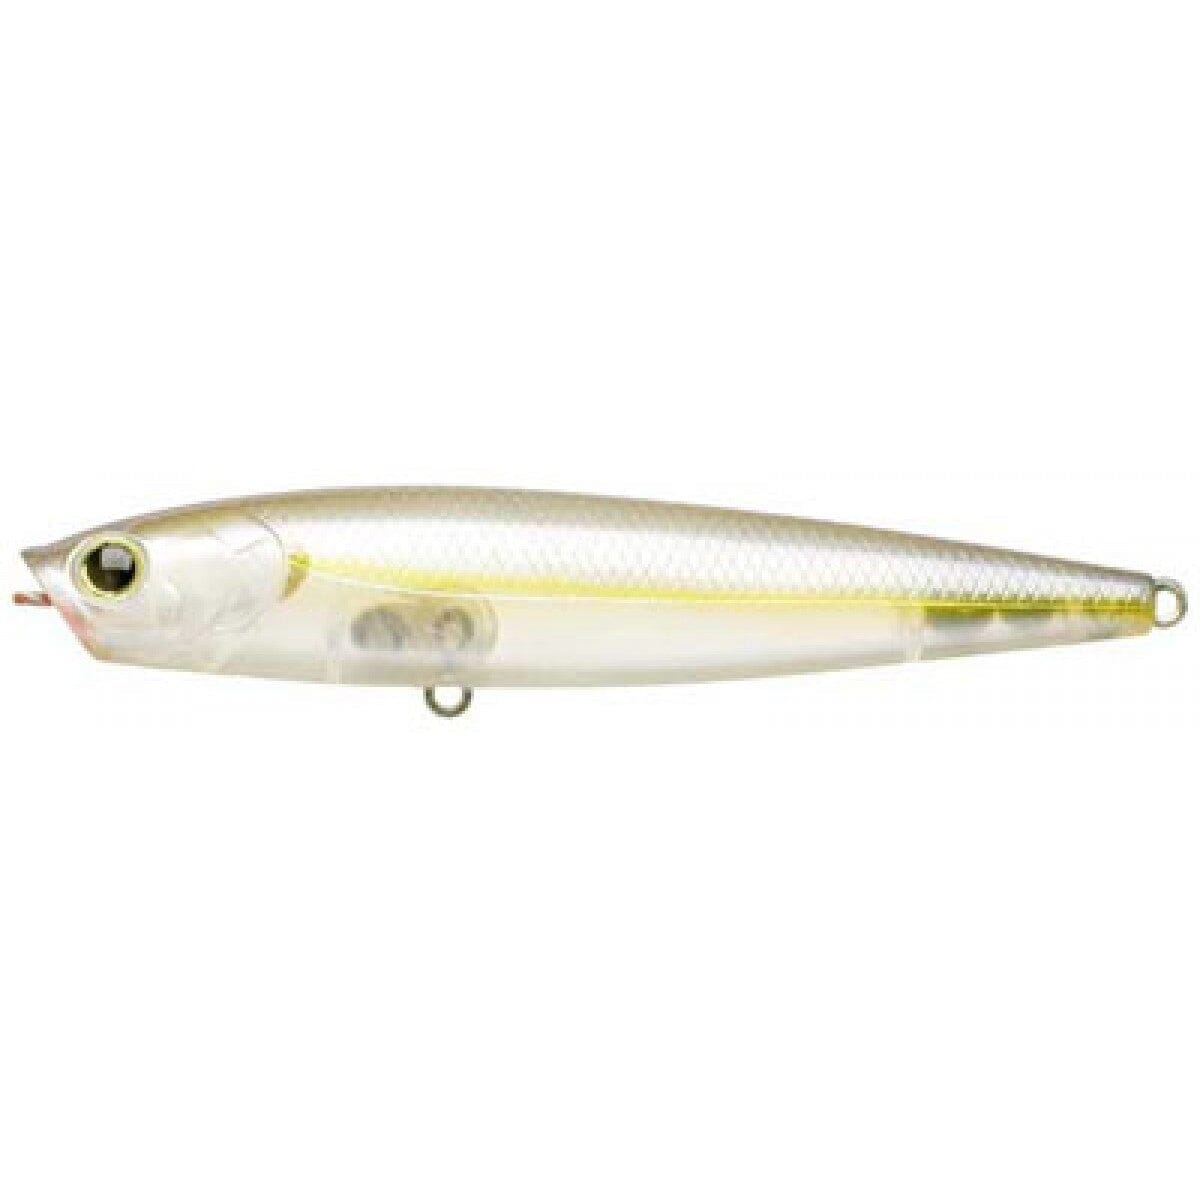 Lucky Craft Gunfish 115 Chartreuse Shad